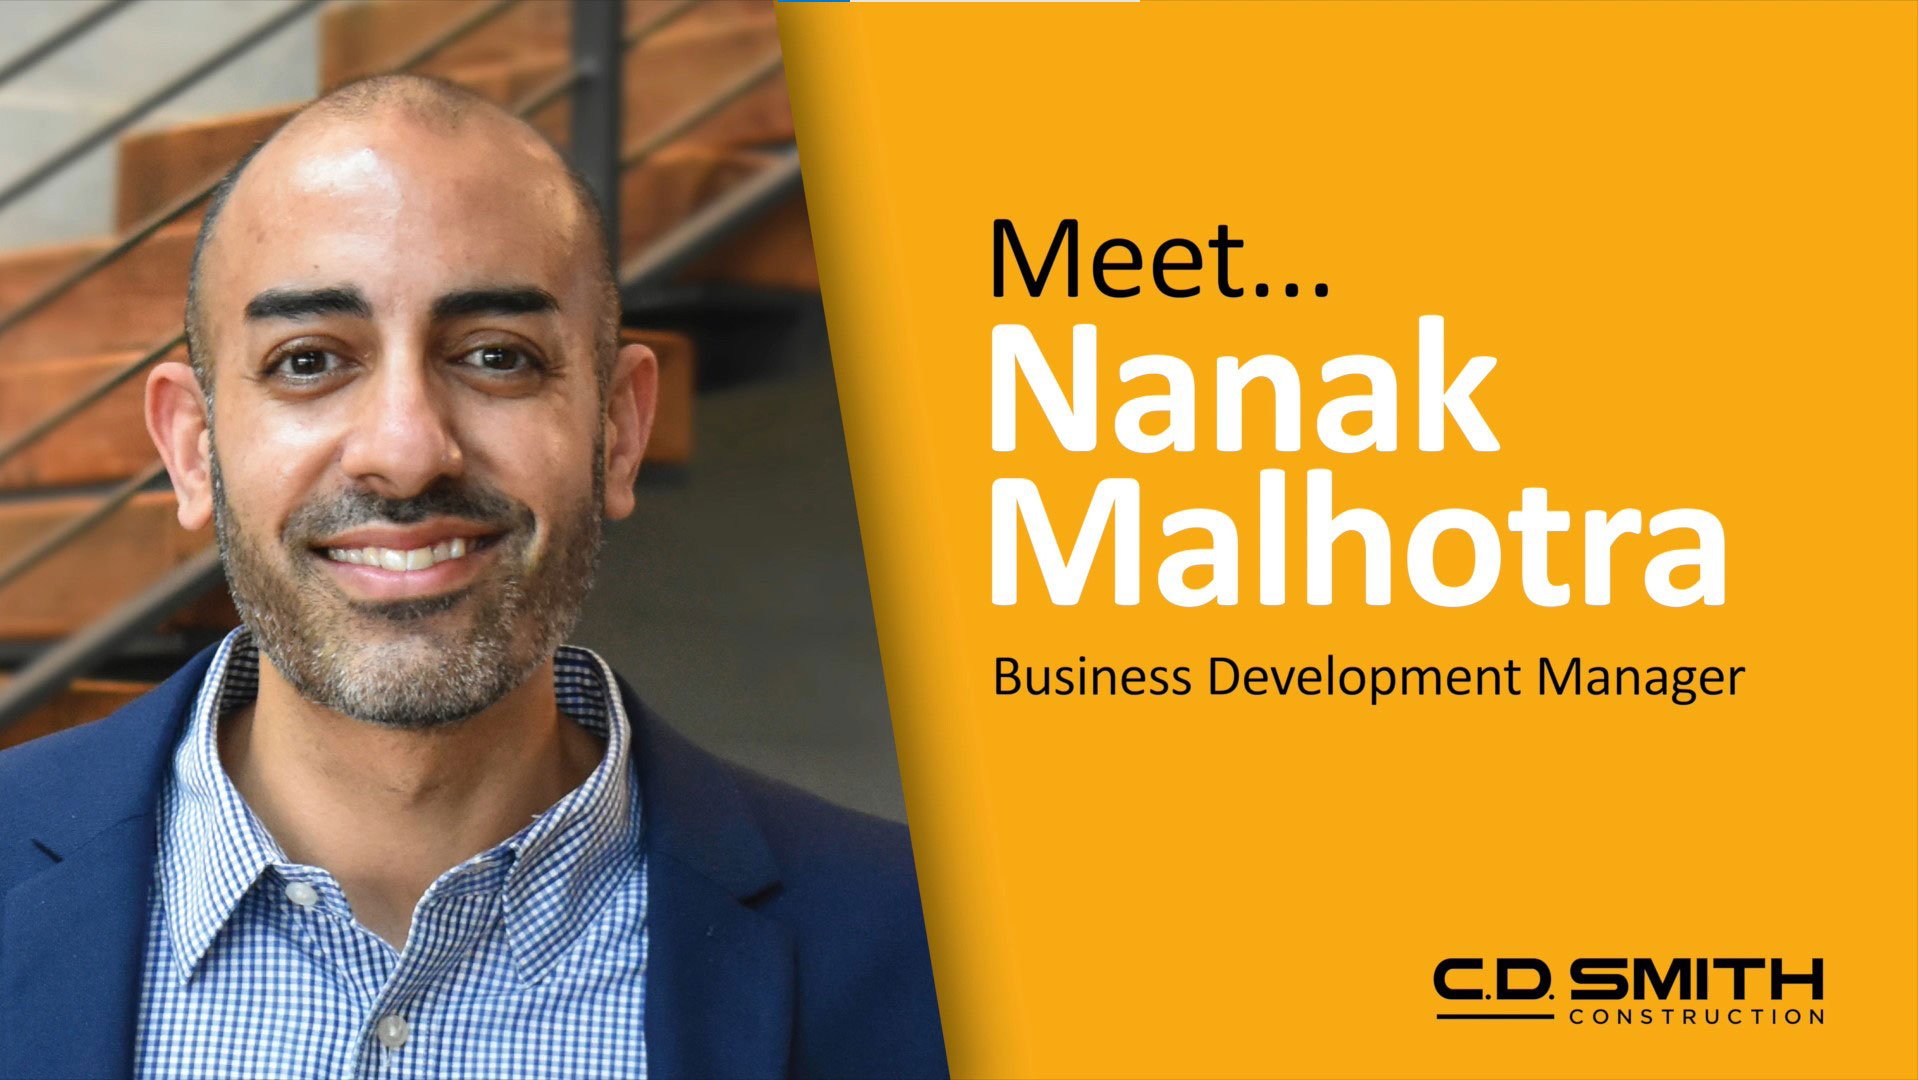 Building relationships with C.D. Smith Construction Business Development Manager Nanak Malhotra